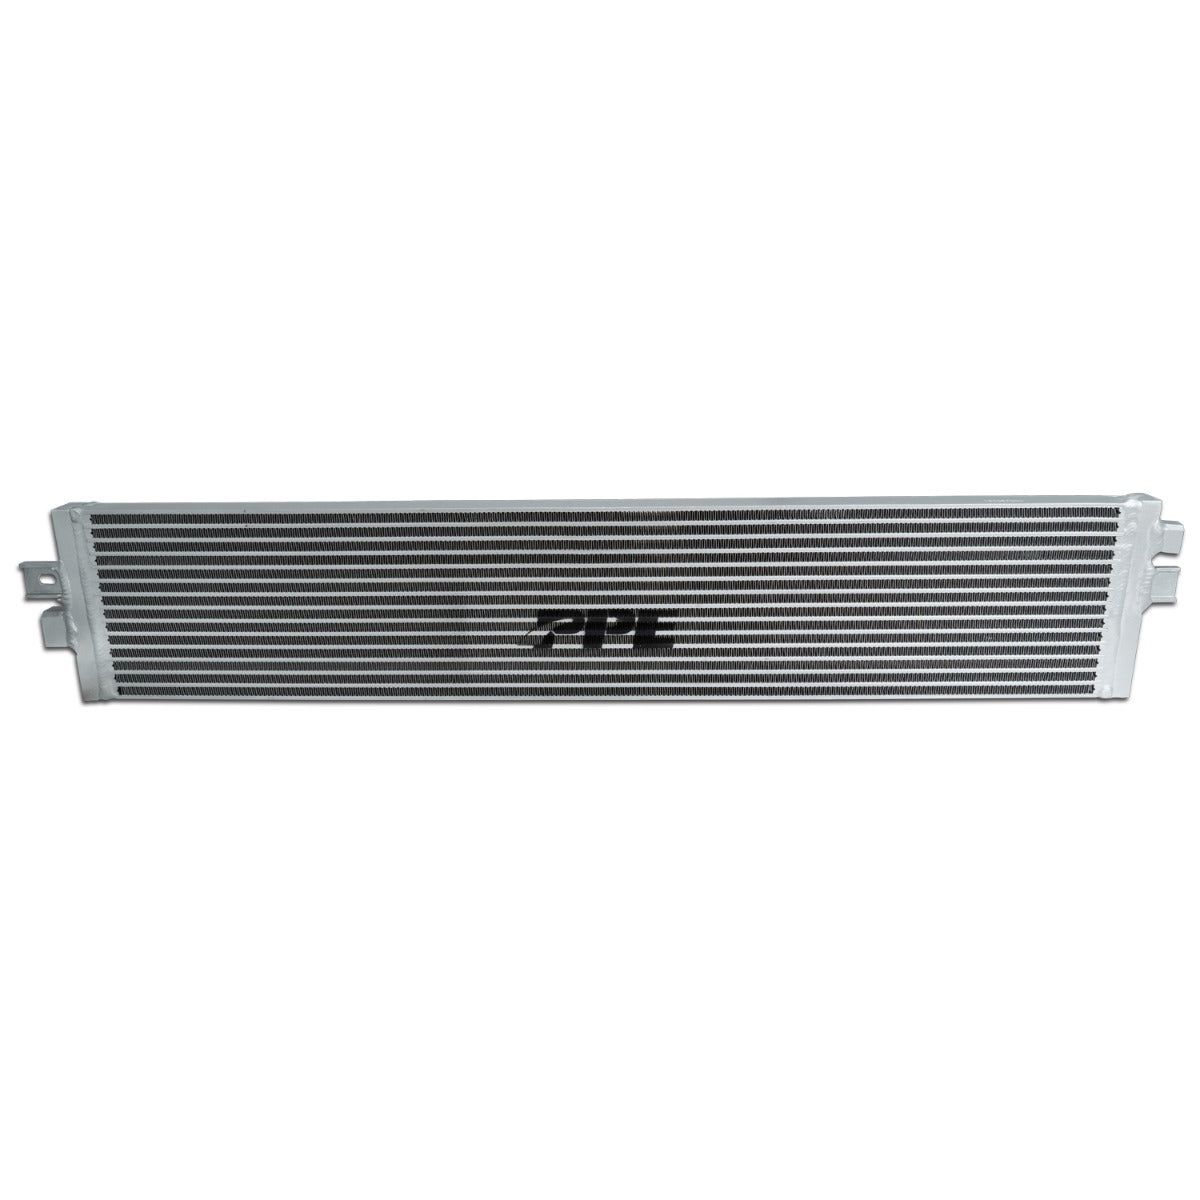 PPE - PPE Heavy Duty Bar and Plate Transmission Cooler For 2020+ GM 1500 3.0L Diesel